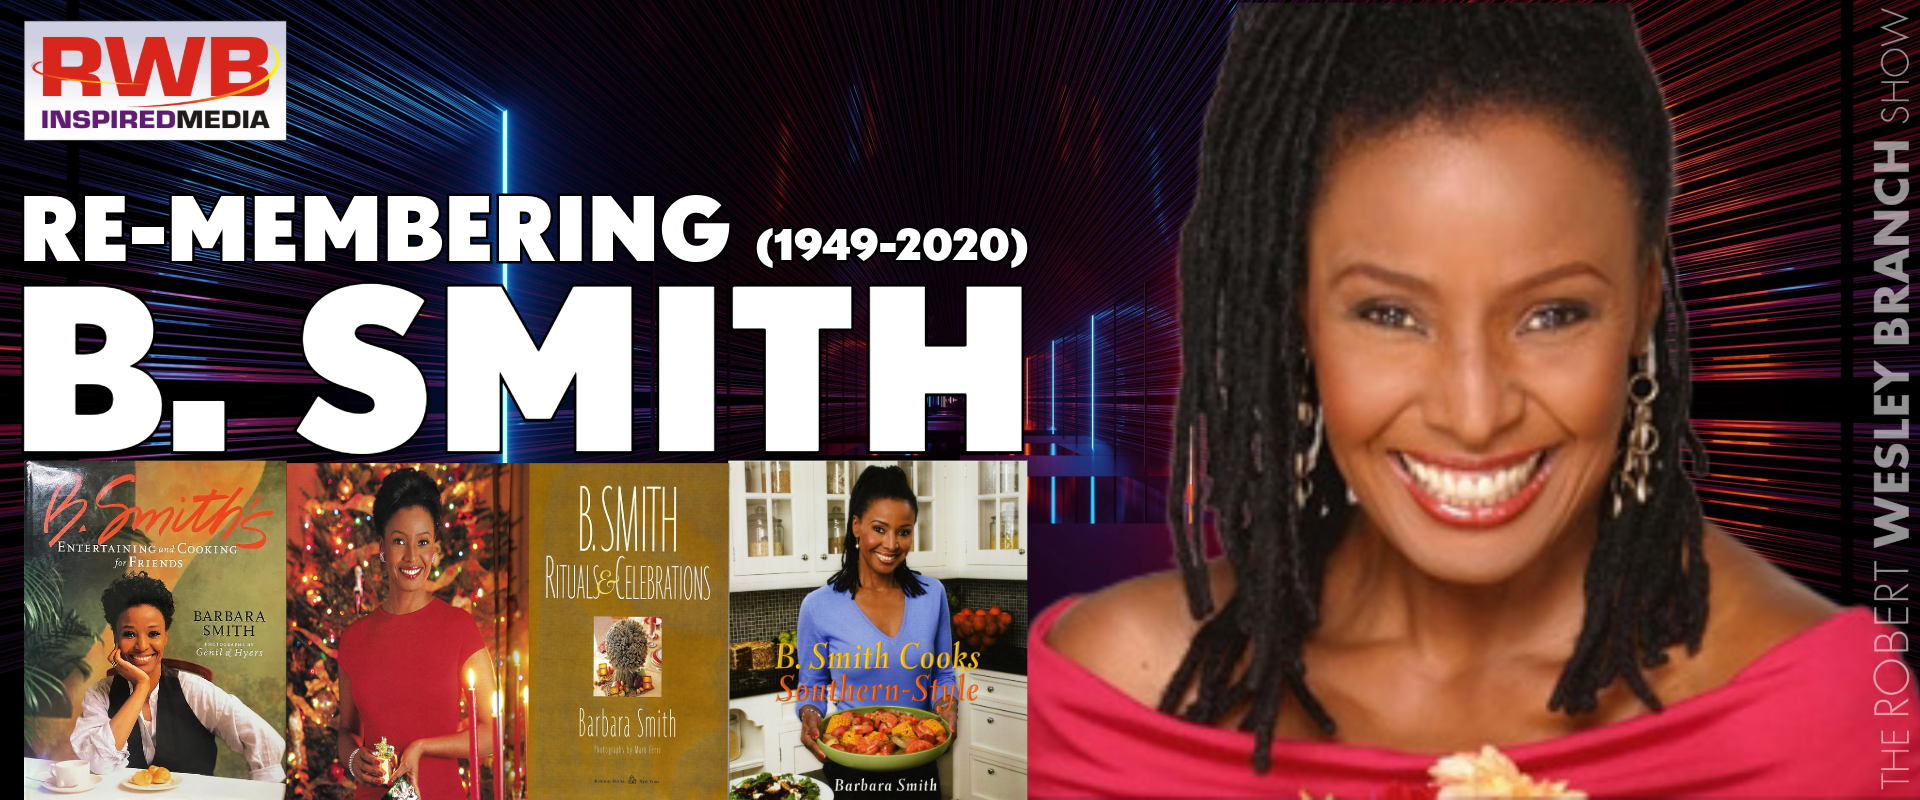 Permalink to: Re-Membering B. Smith (1949-2020)